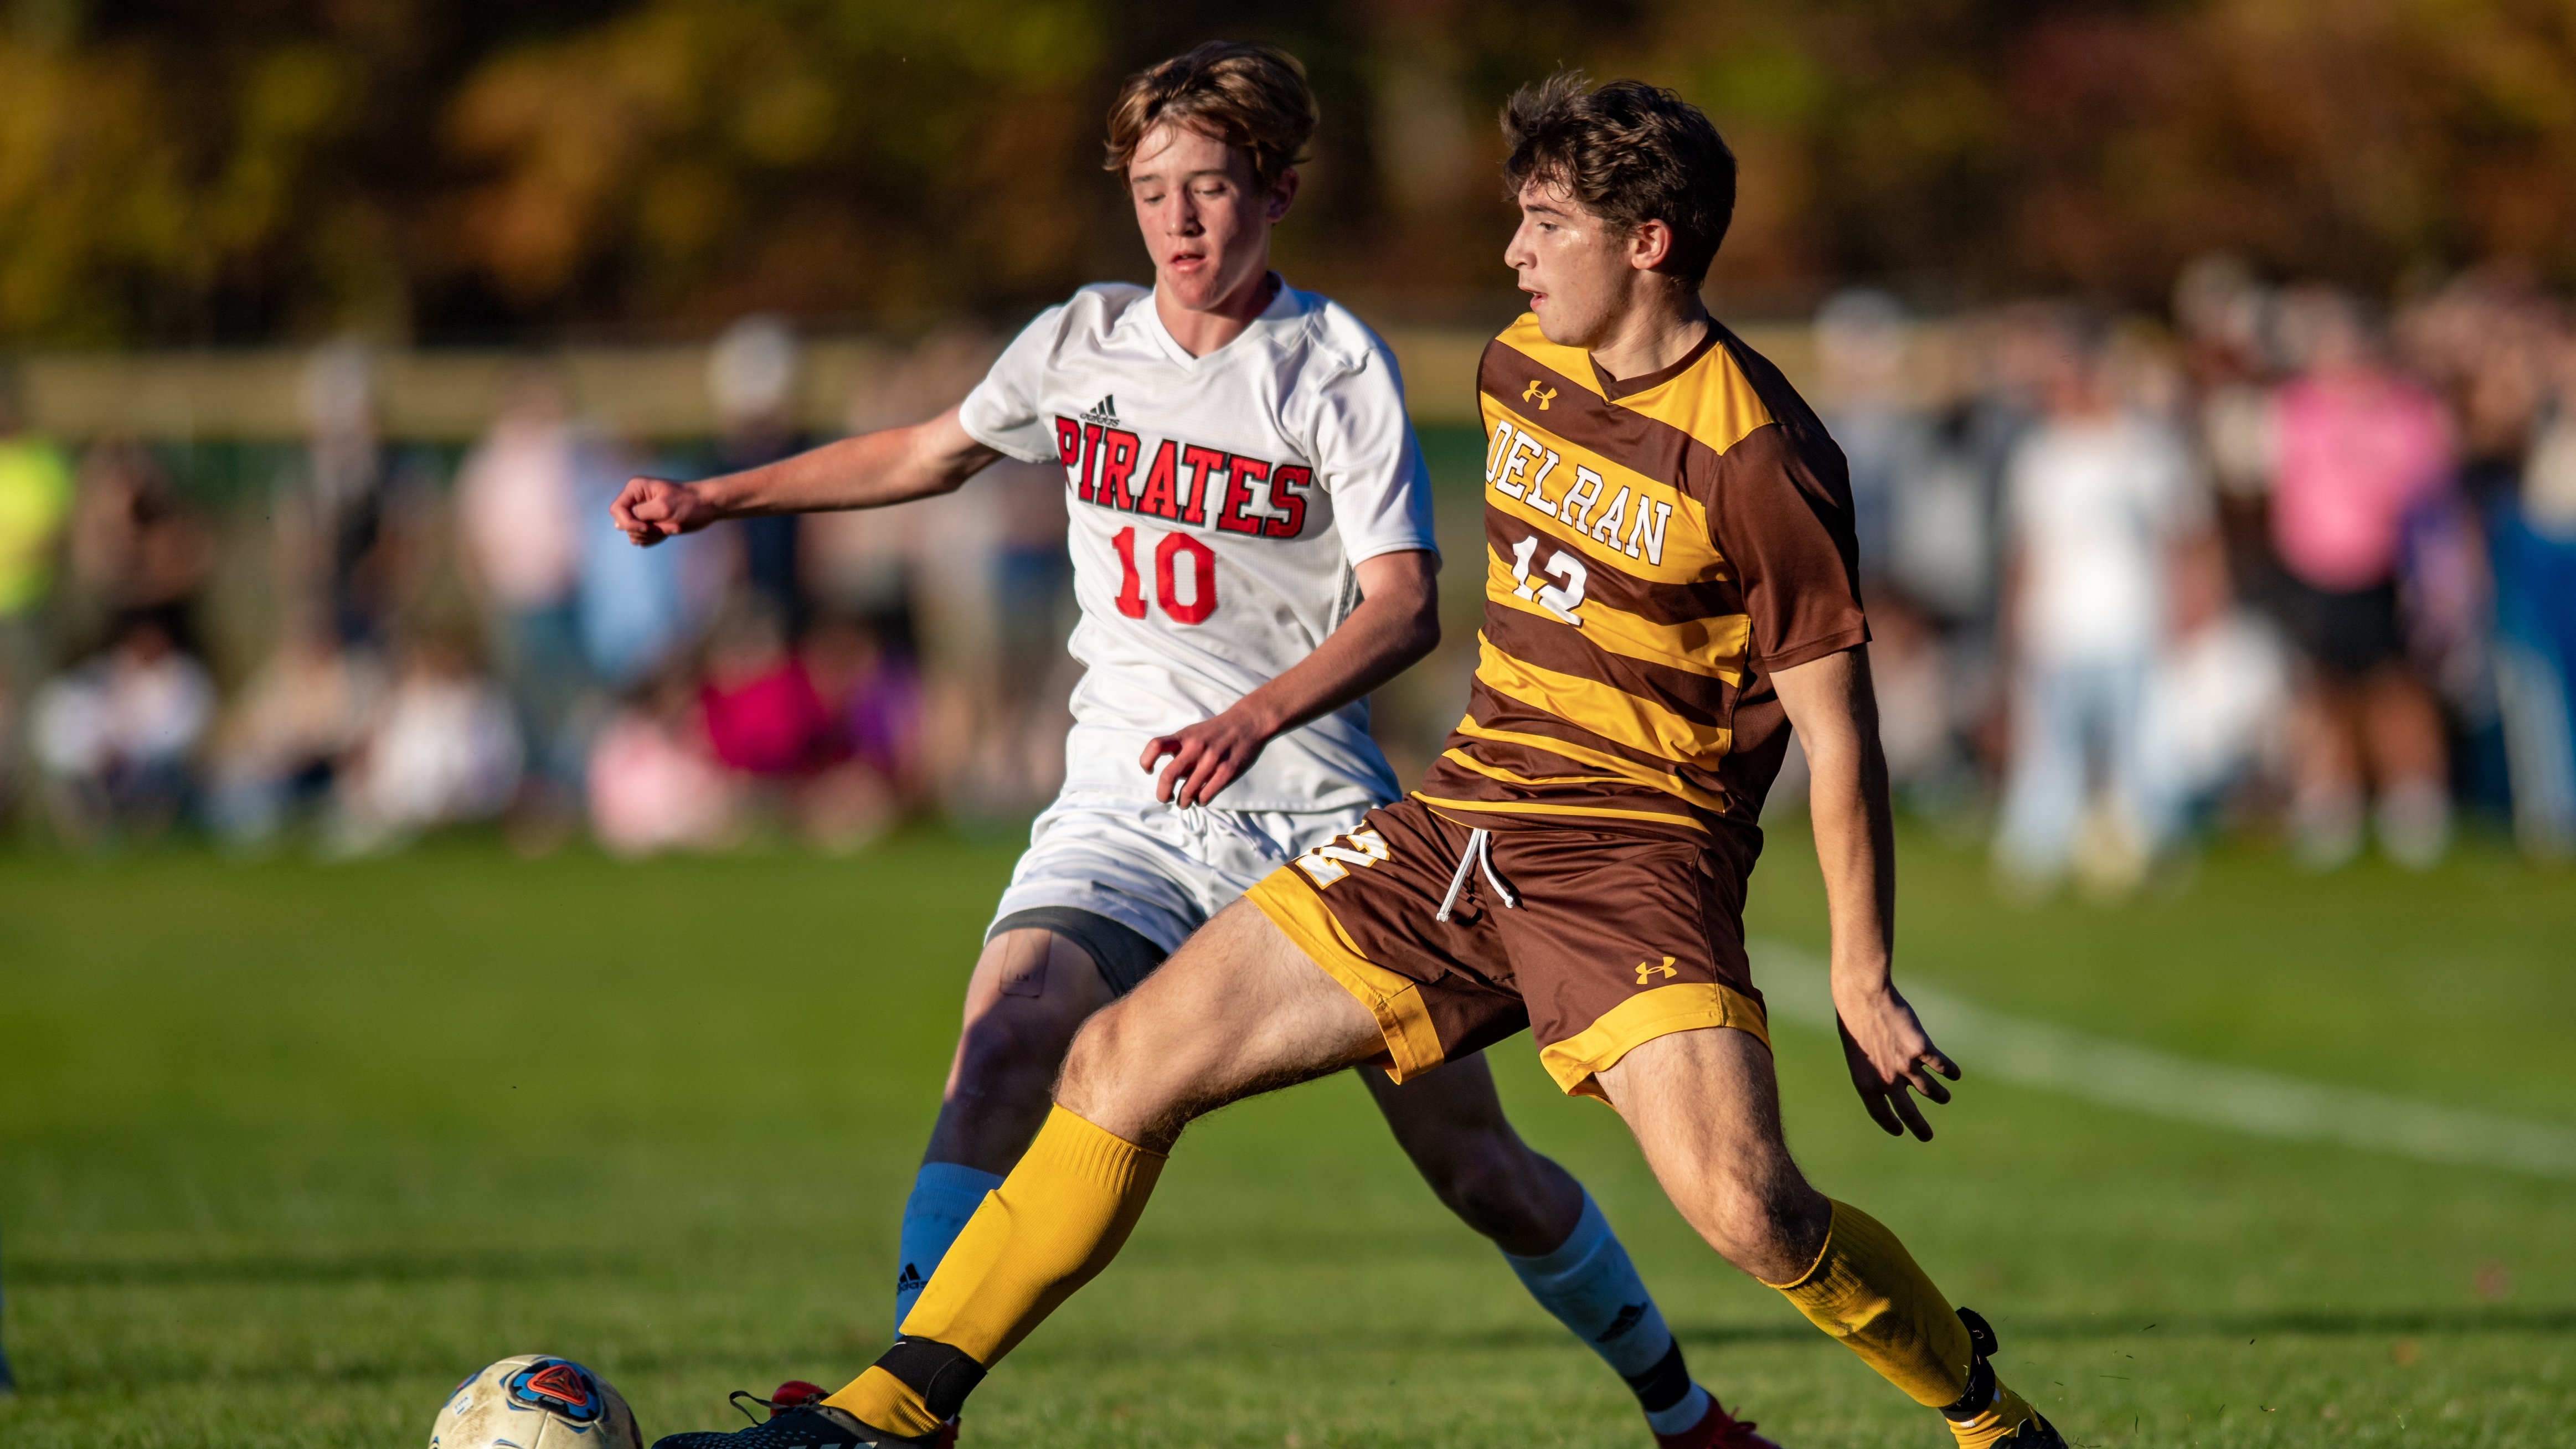 Central State Eight Boys Soccer Stats